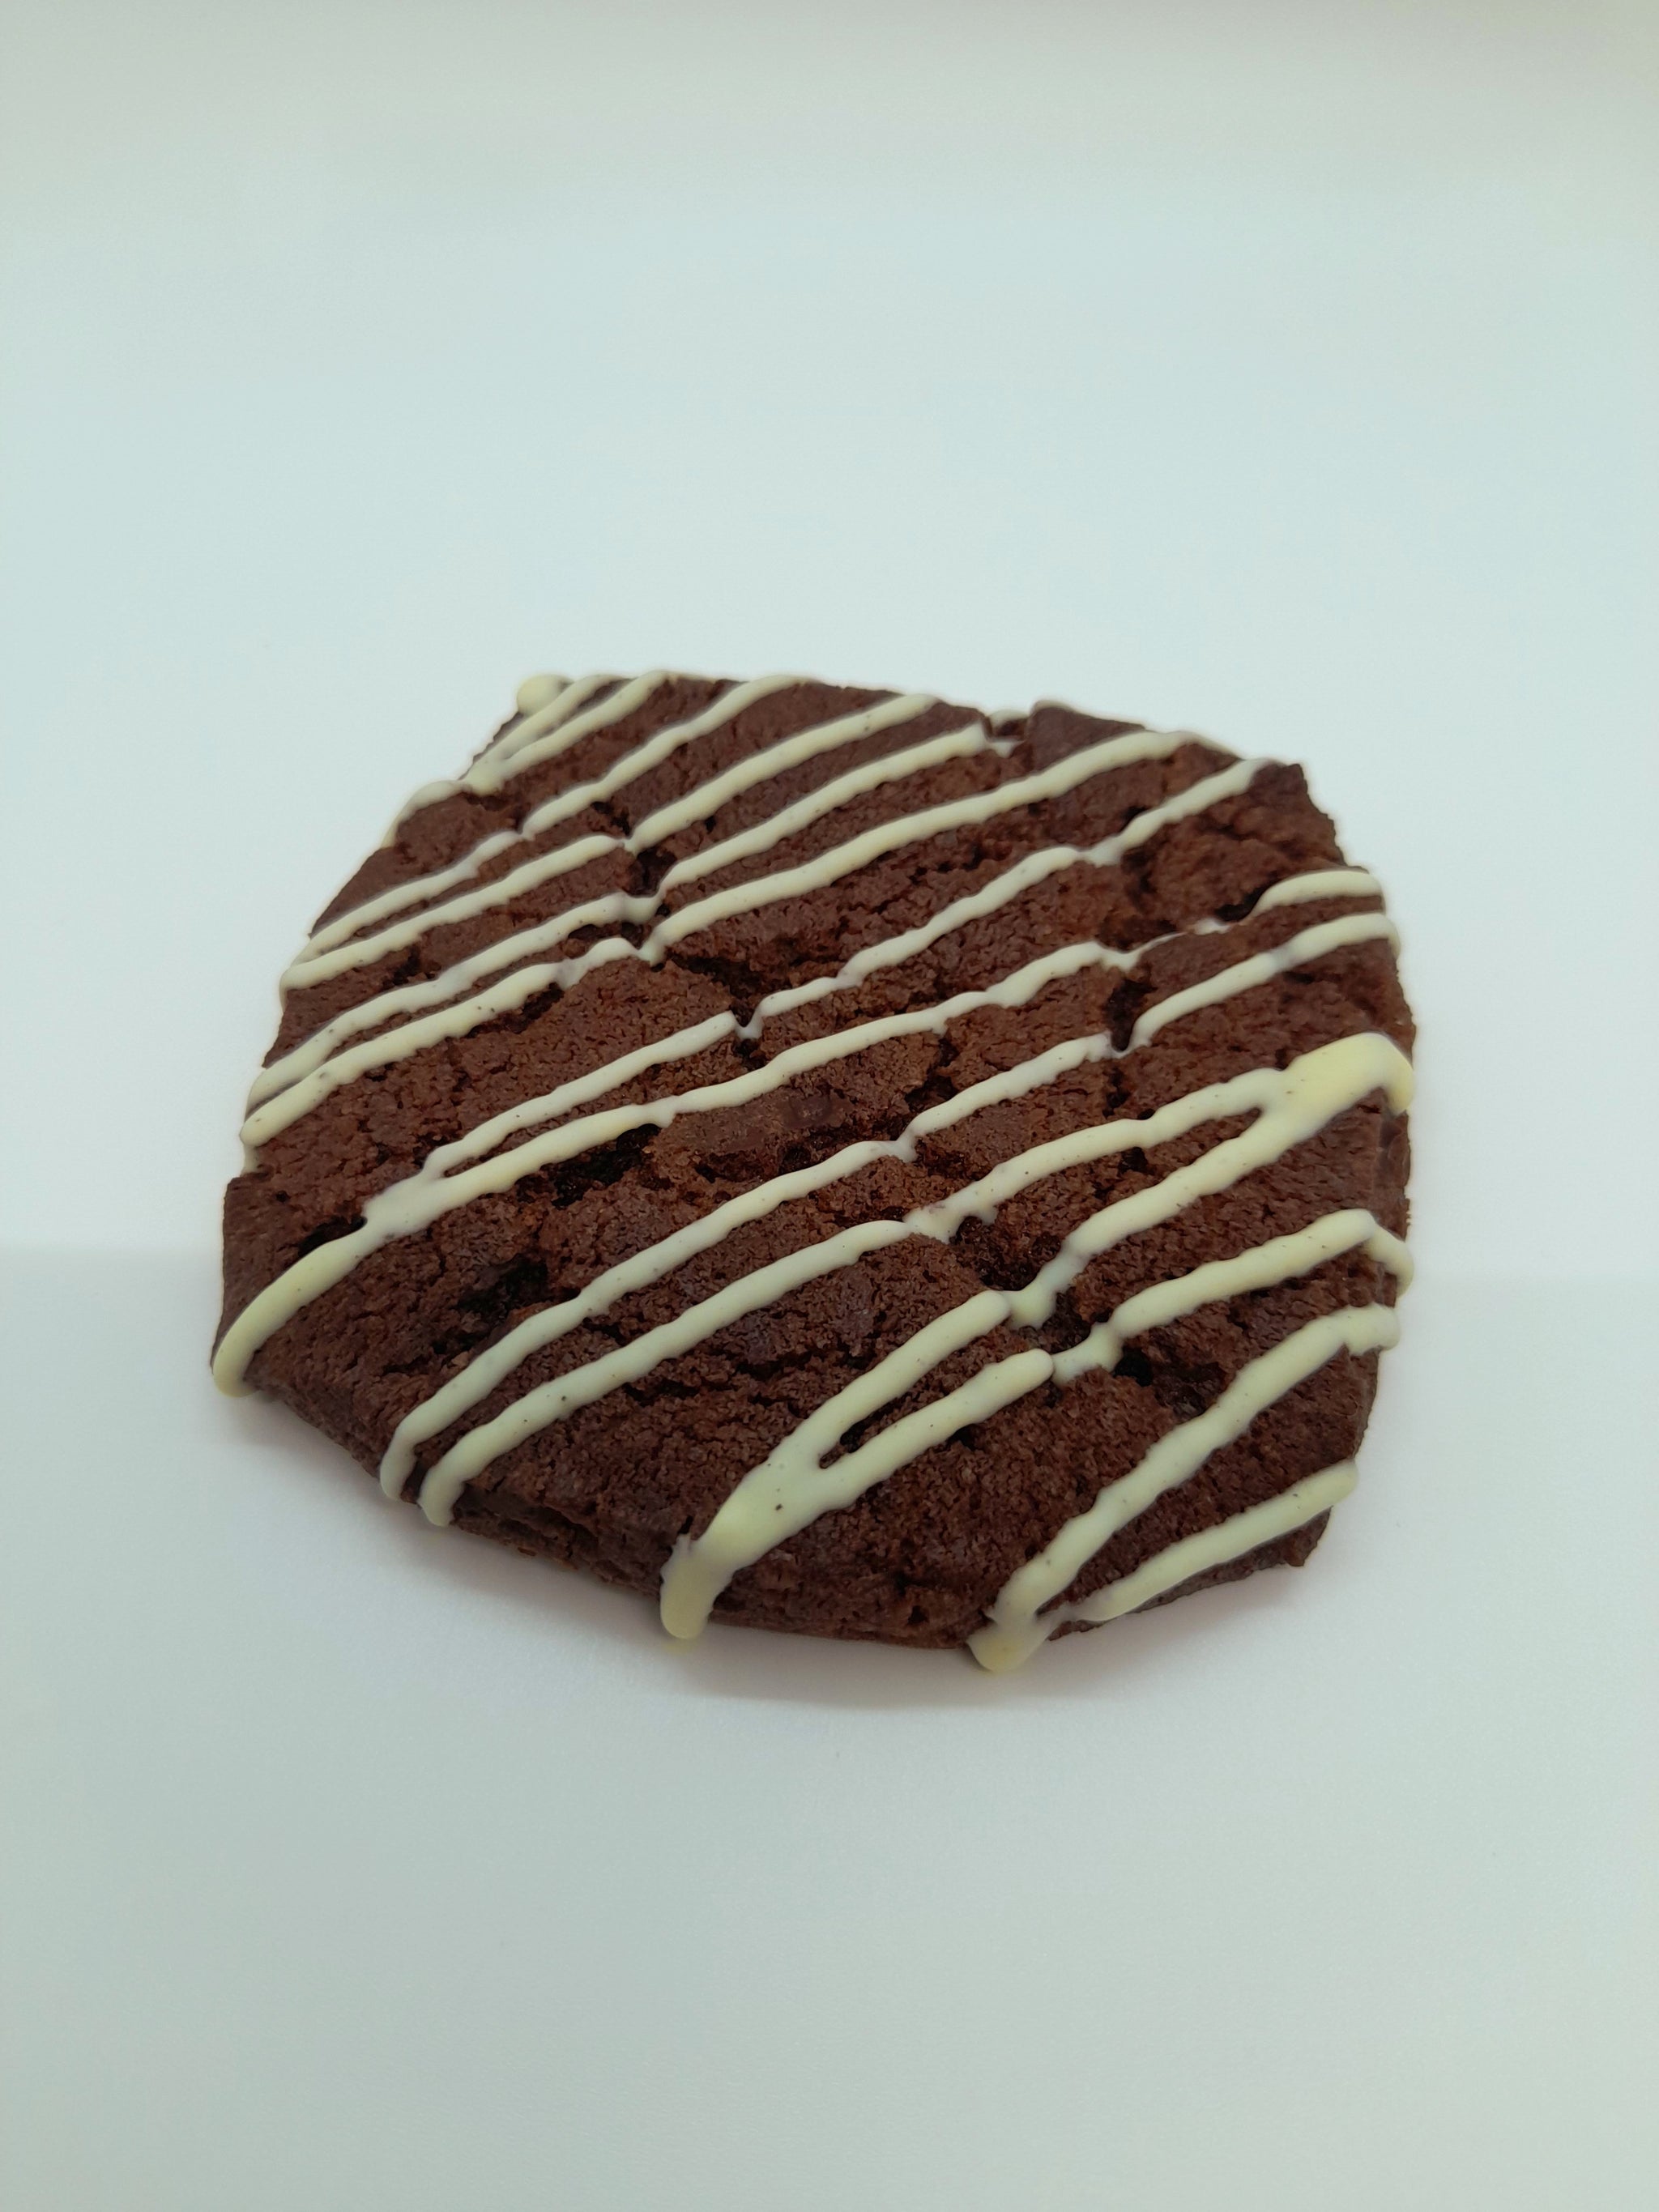 Single Classic Kendal Mint Chocolate Cookie